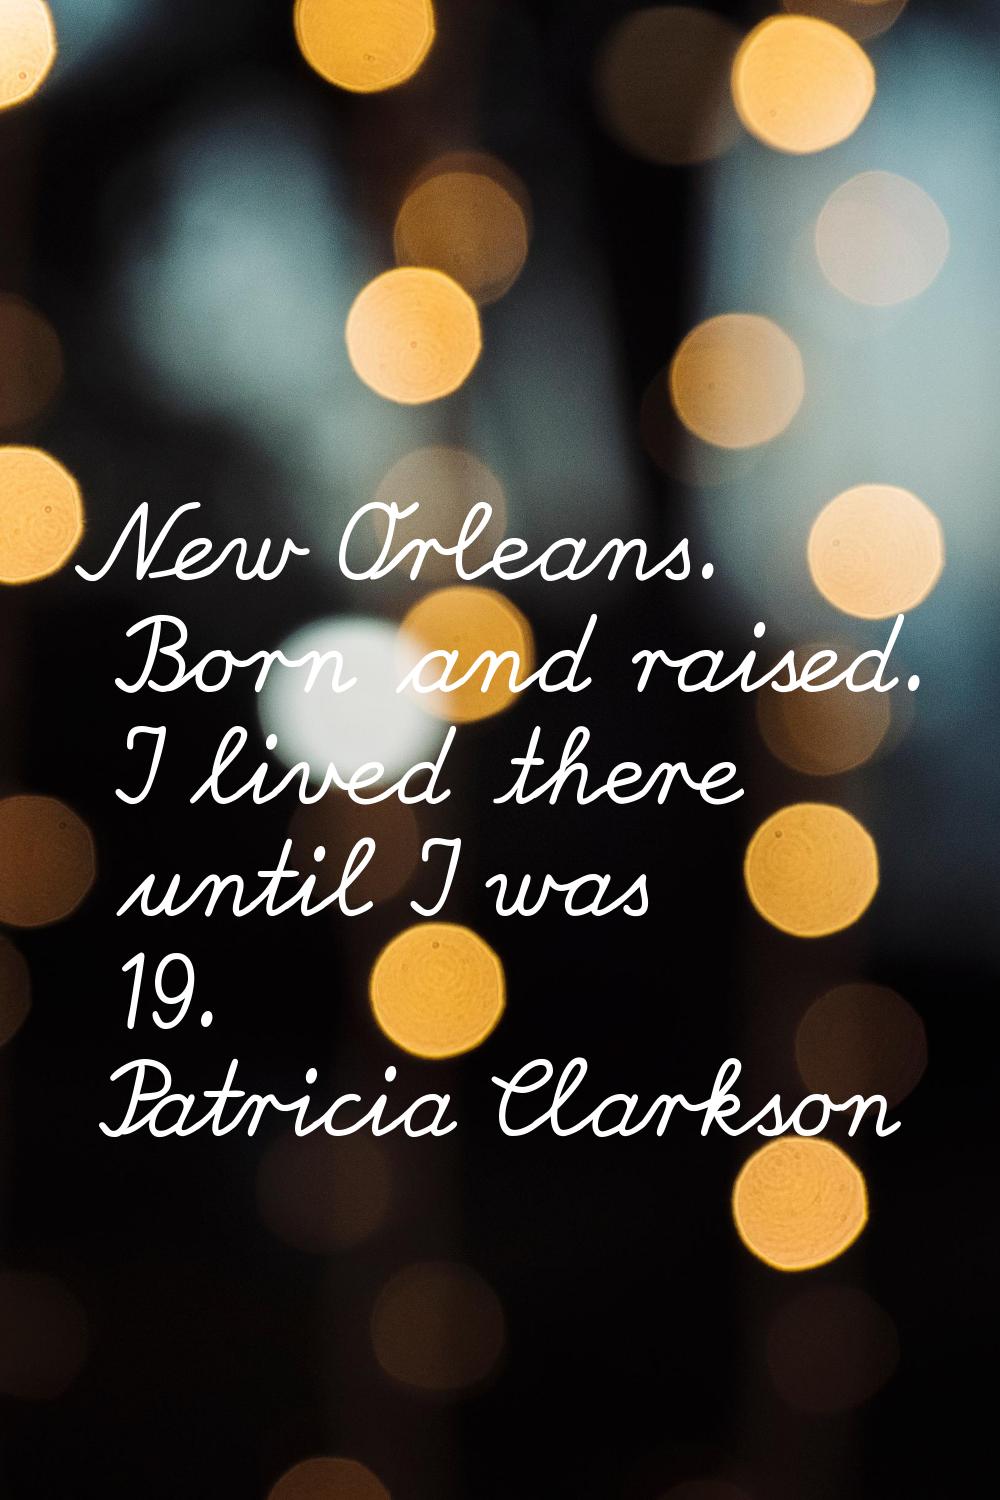 New Orleans. Born and raised. I lived there until I was 19.